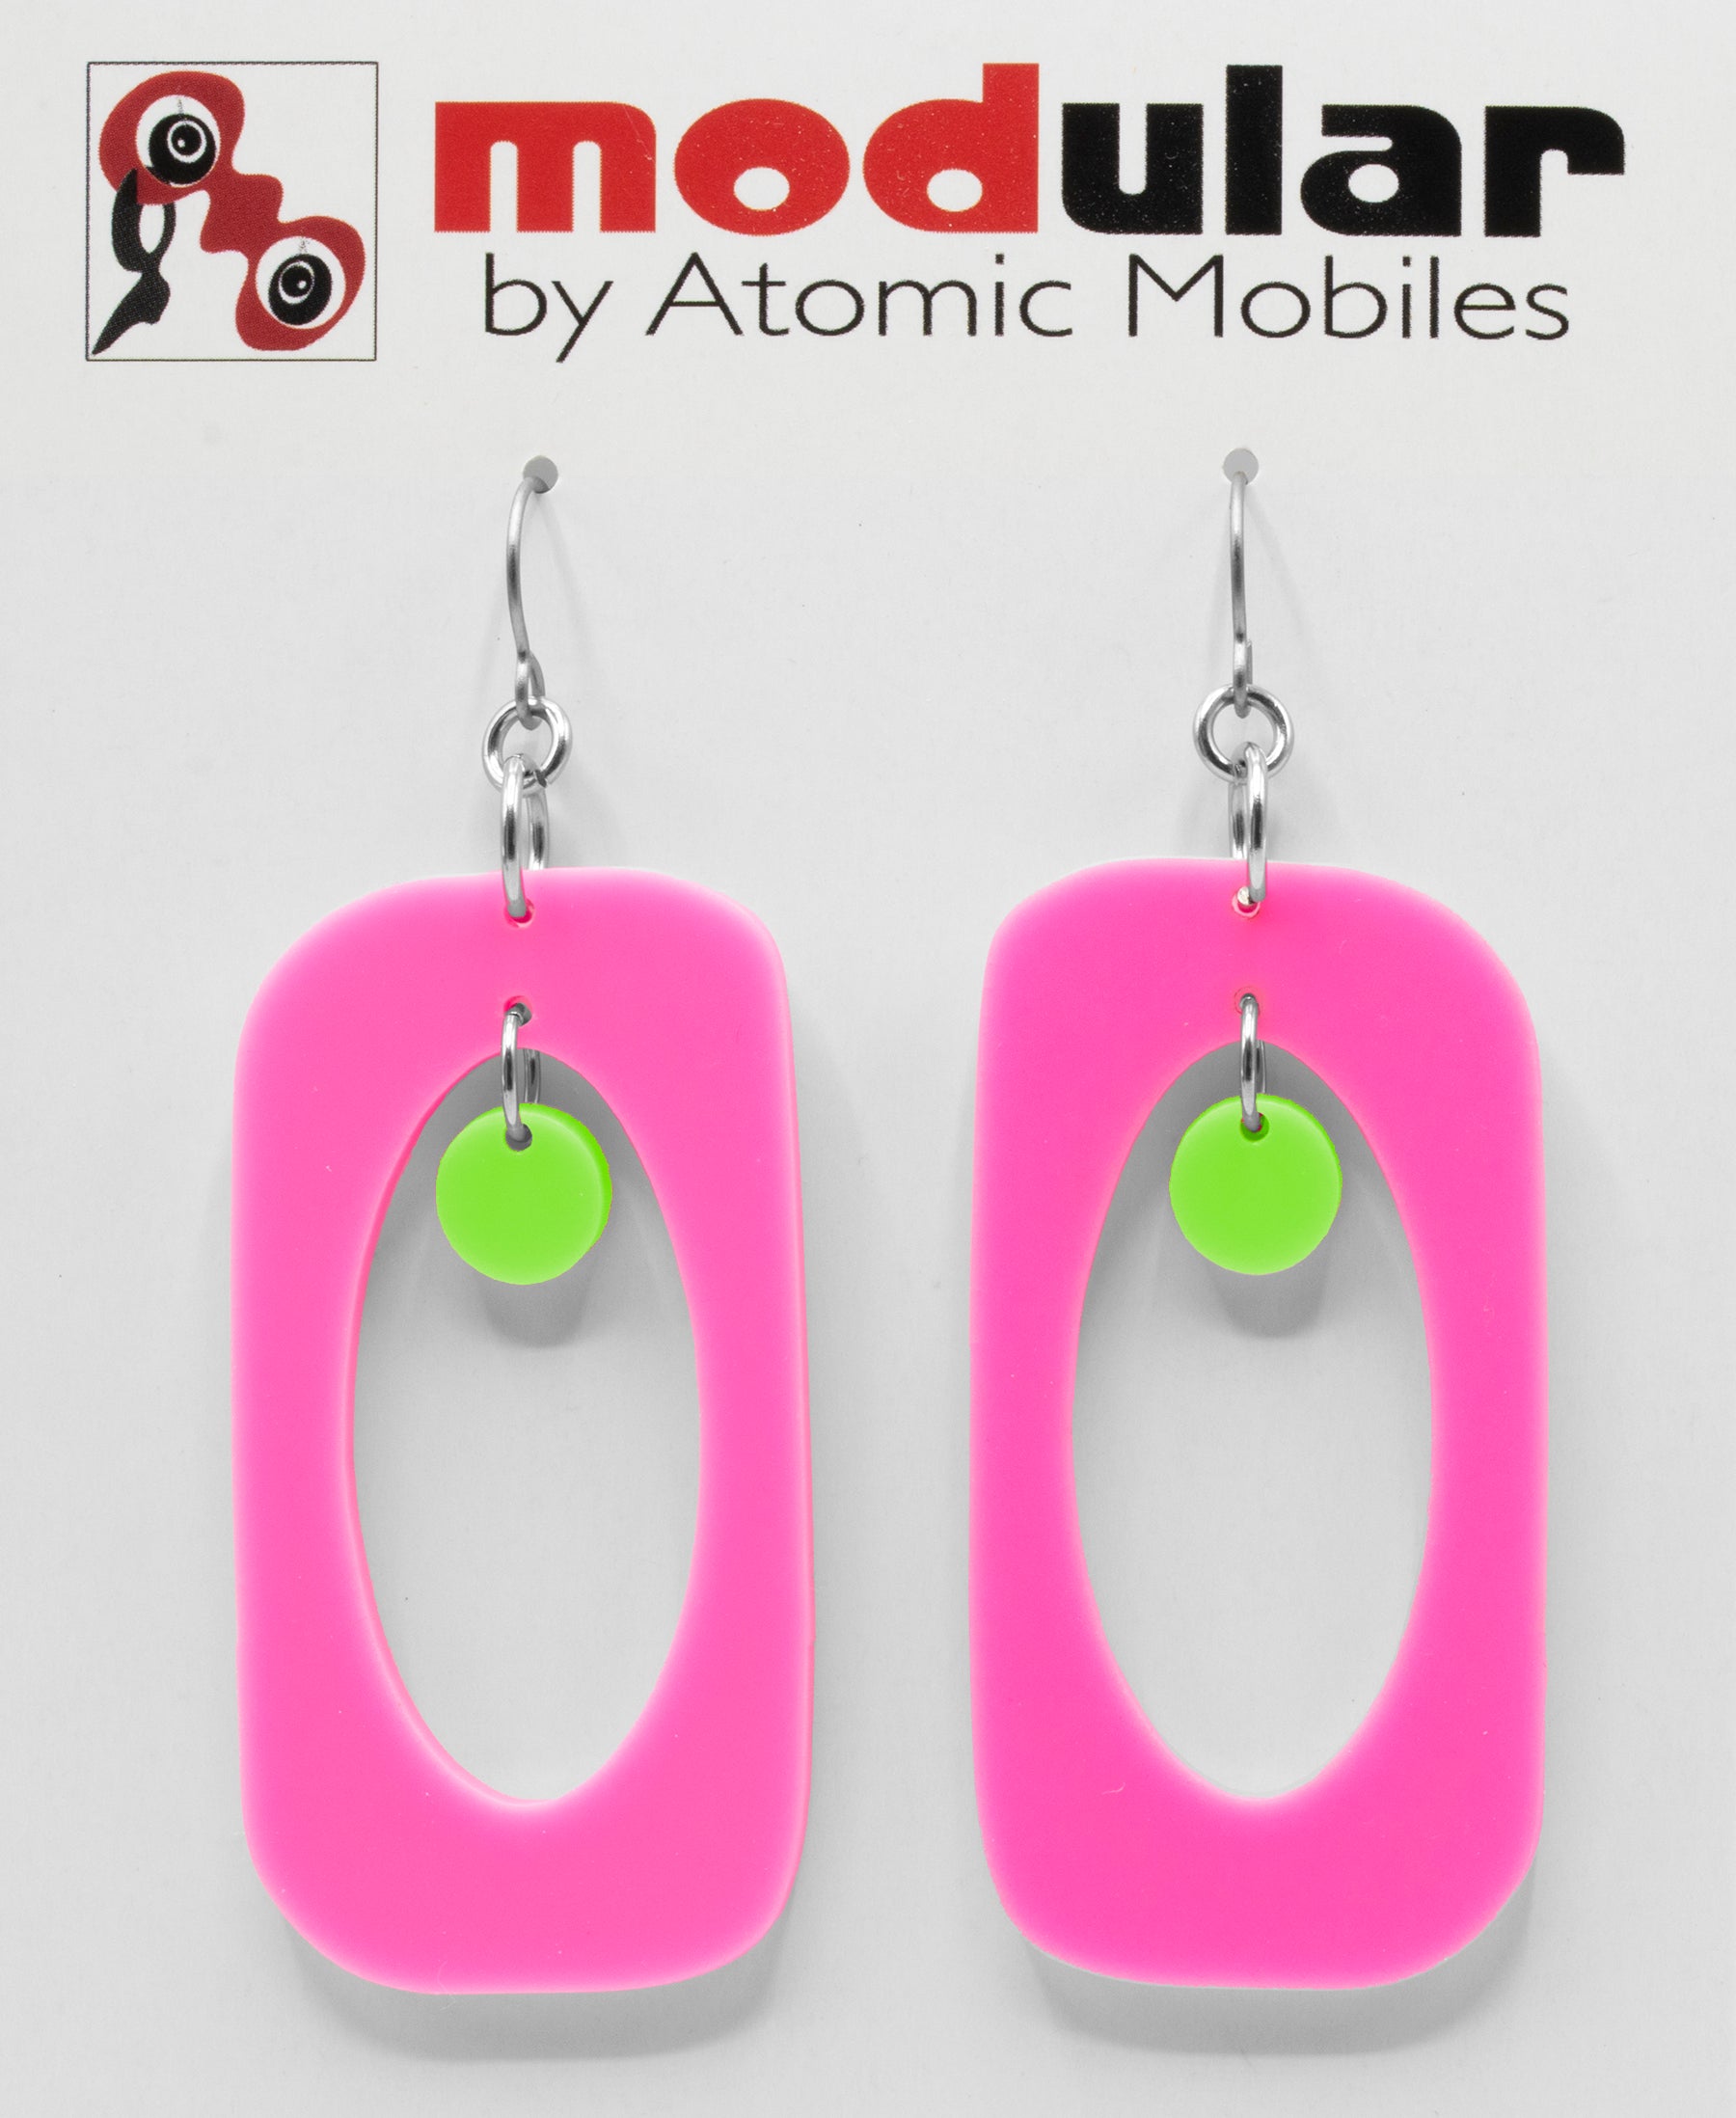 MODular Earrings - Beatnik Boho Statement Earrings in Hot Pink and Lime by AtomicMobiles.com - retro era inspired mod handmade jewelry